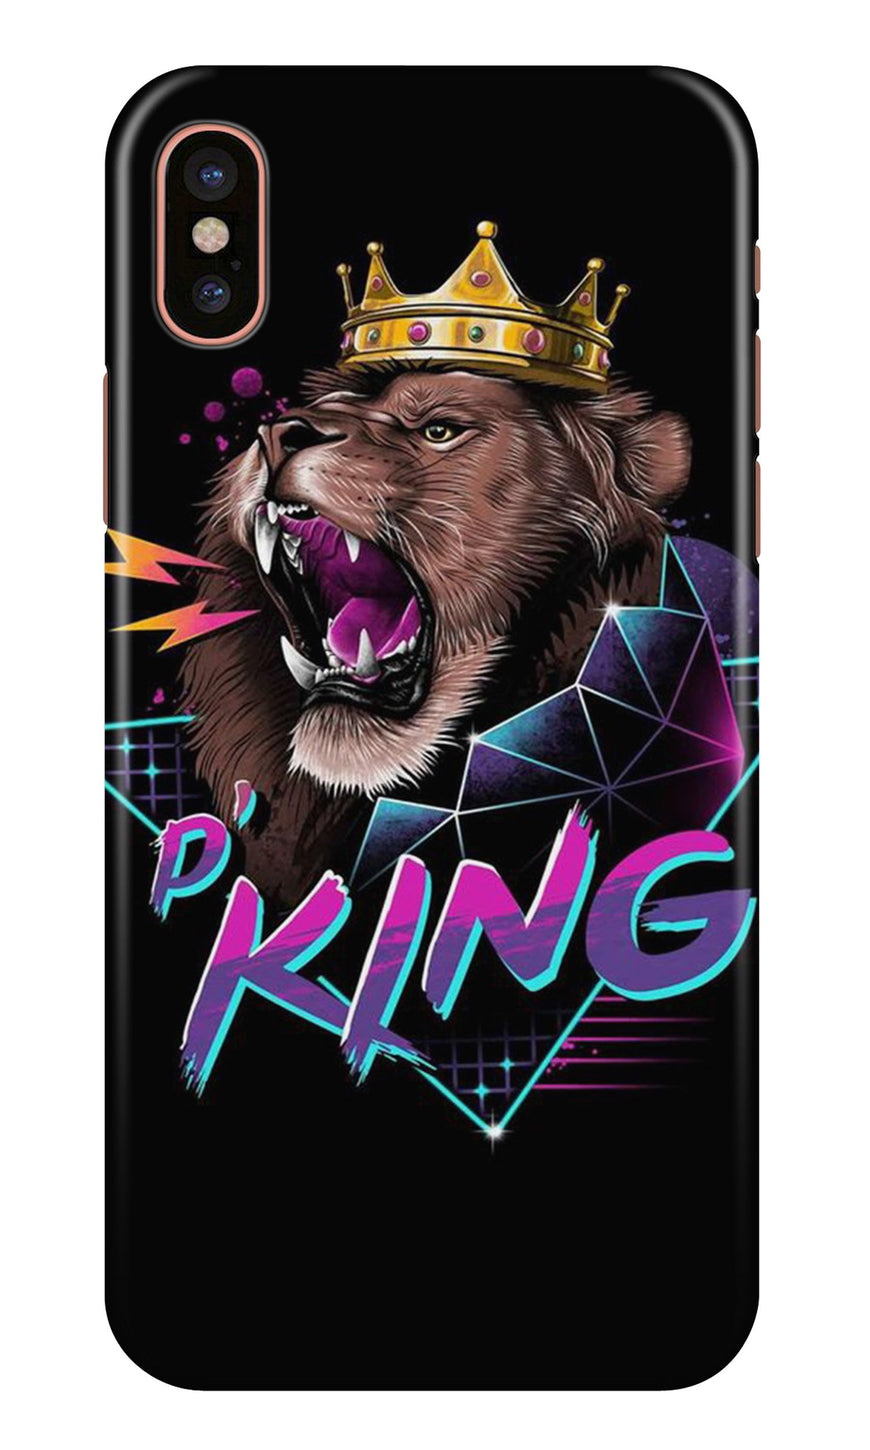 Lion King Case for iPhone X (Design No. 219)